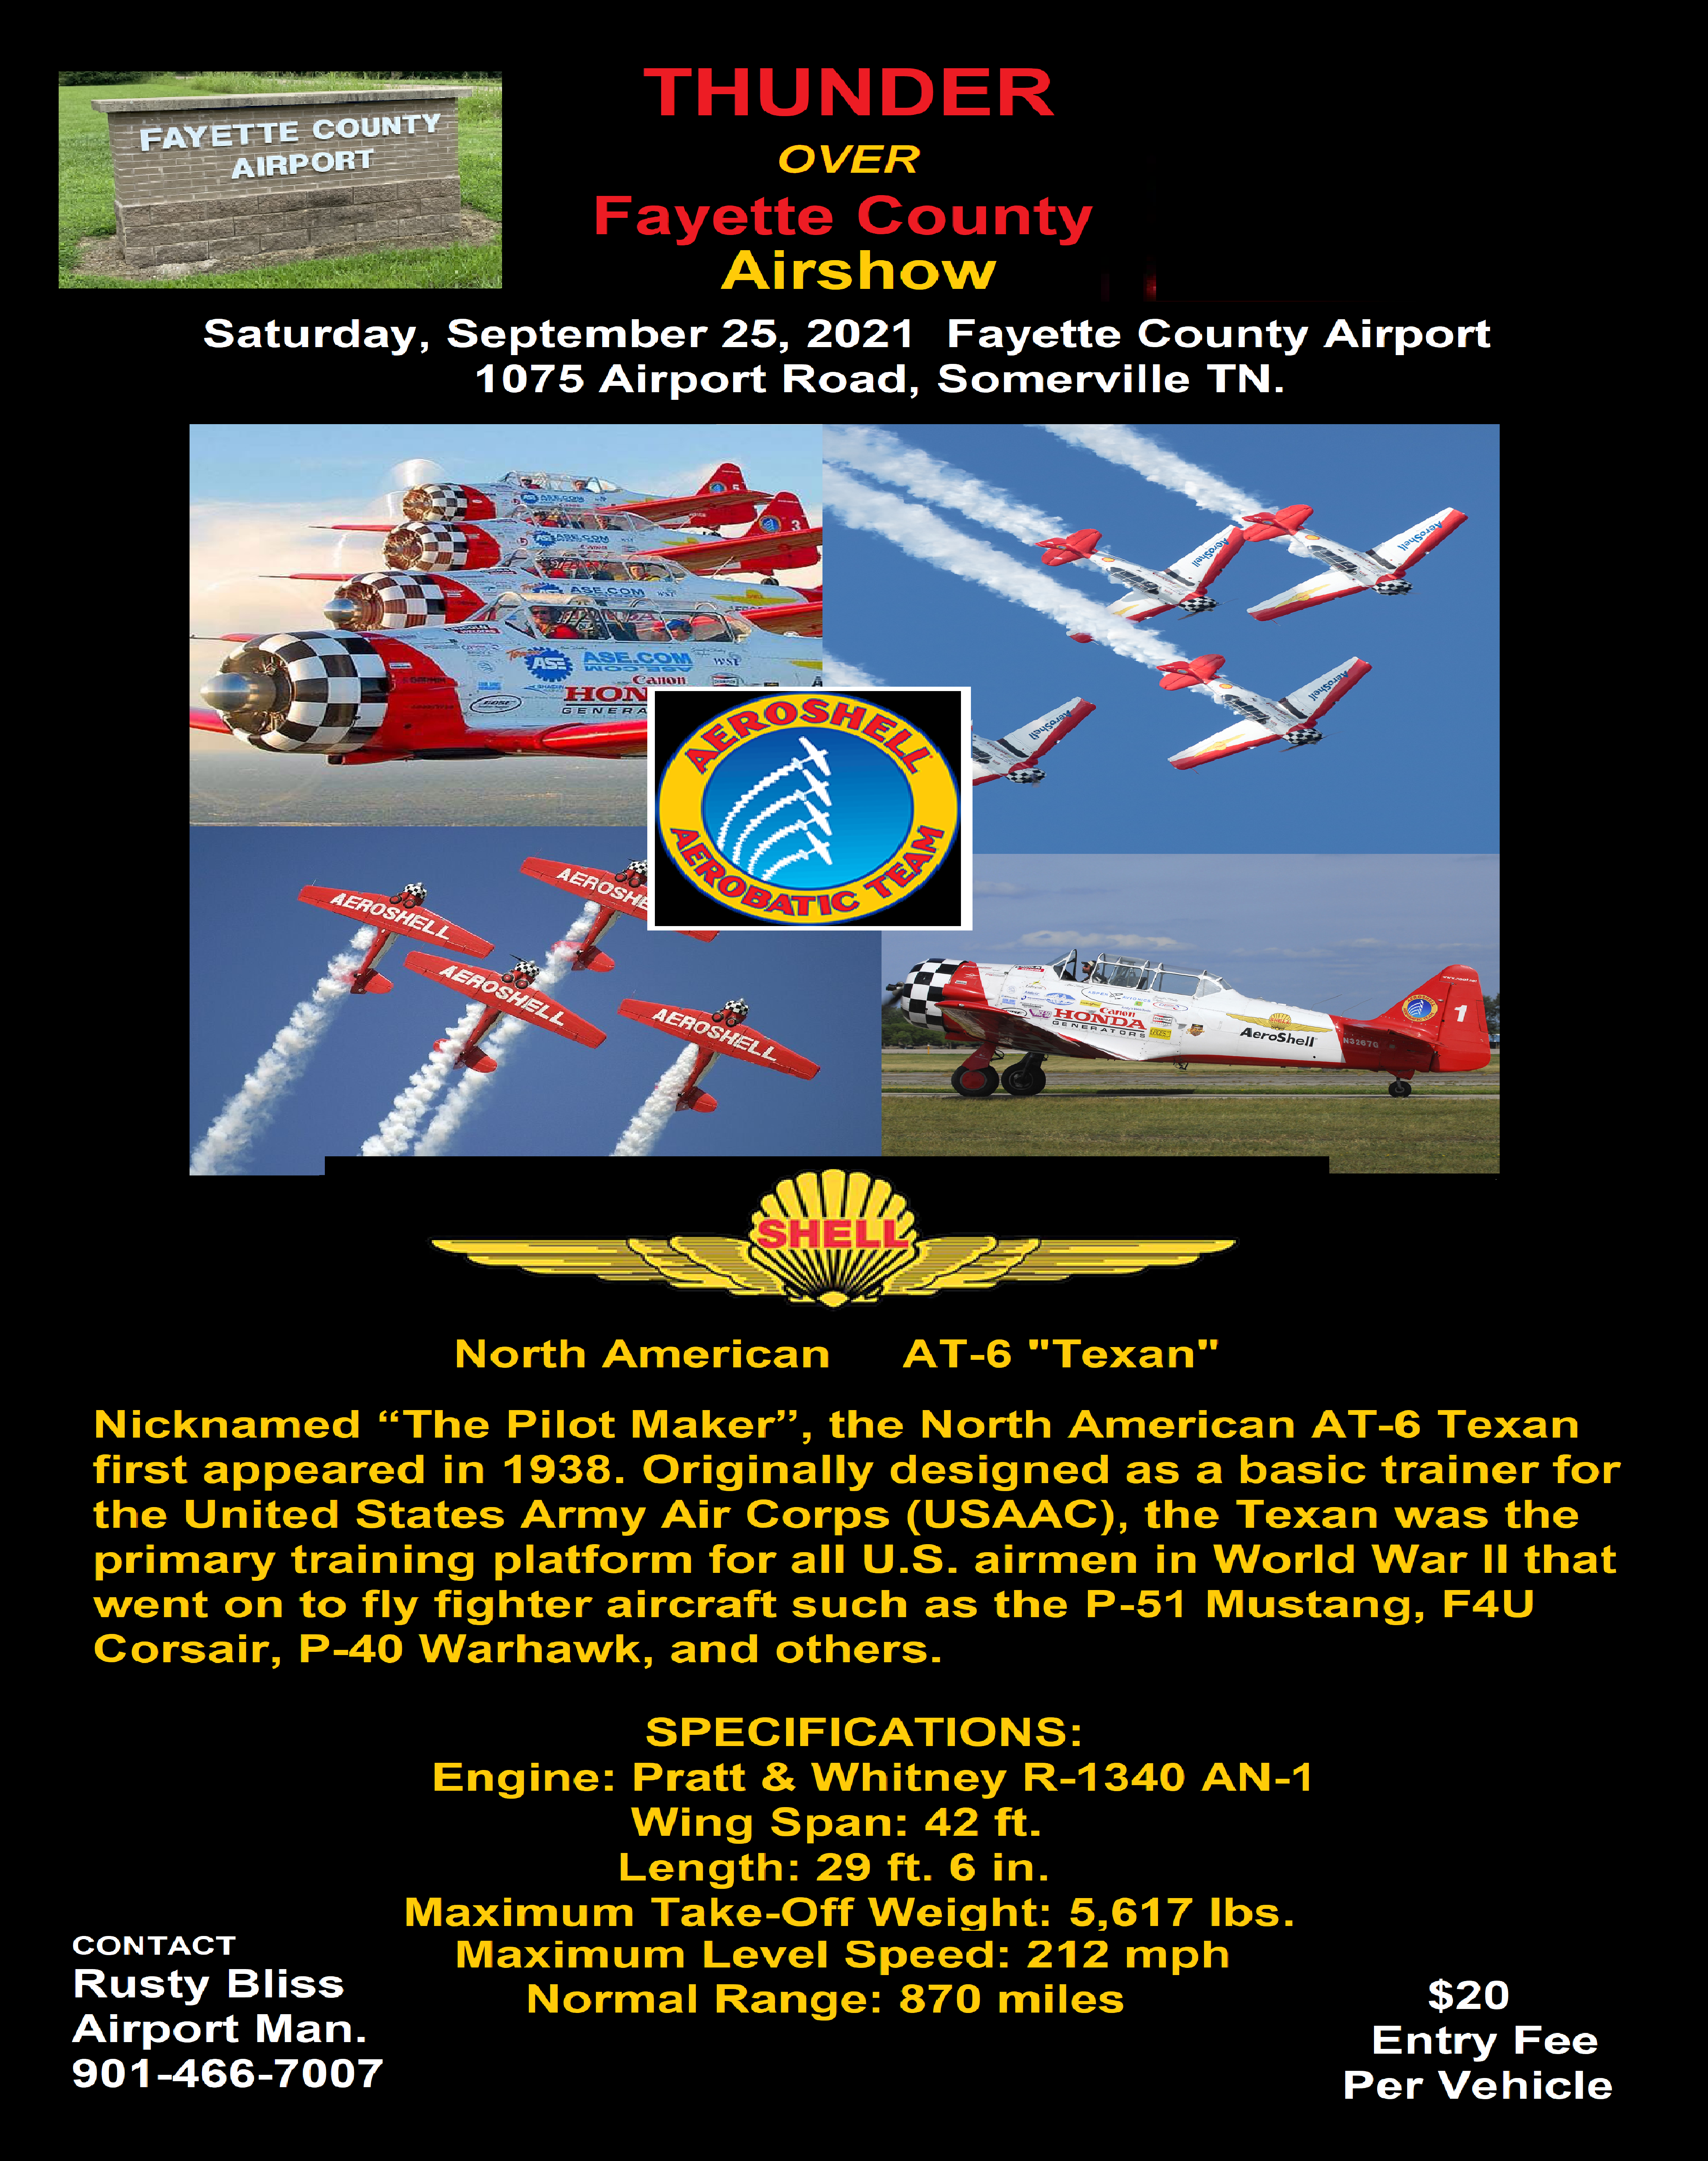 Thunder Over Fayette County Airshow 2021